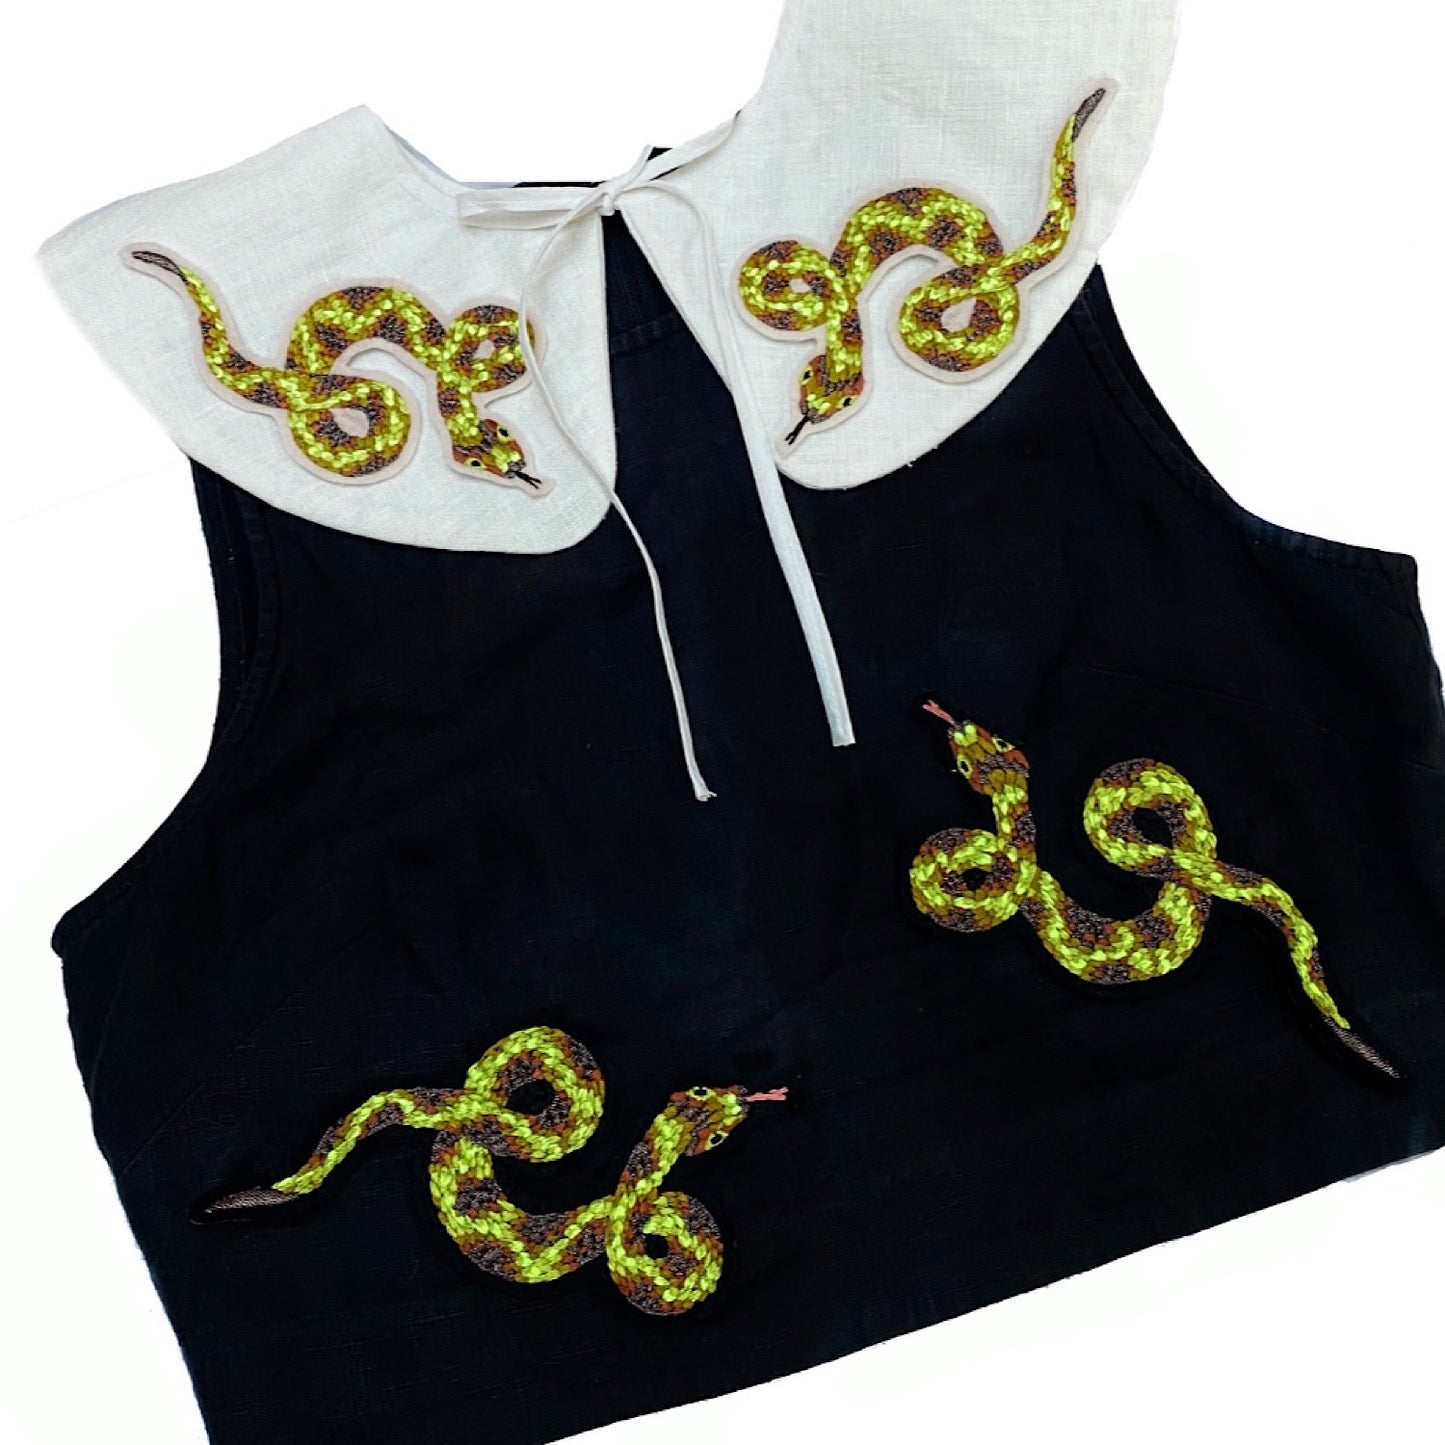 Black sleeveless top with large white collar with four snake embroidered patches placed on the collar and the body of the top 